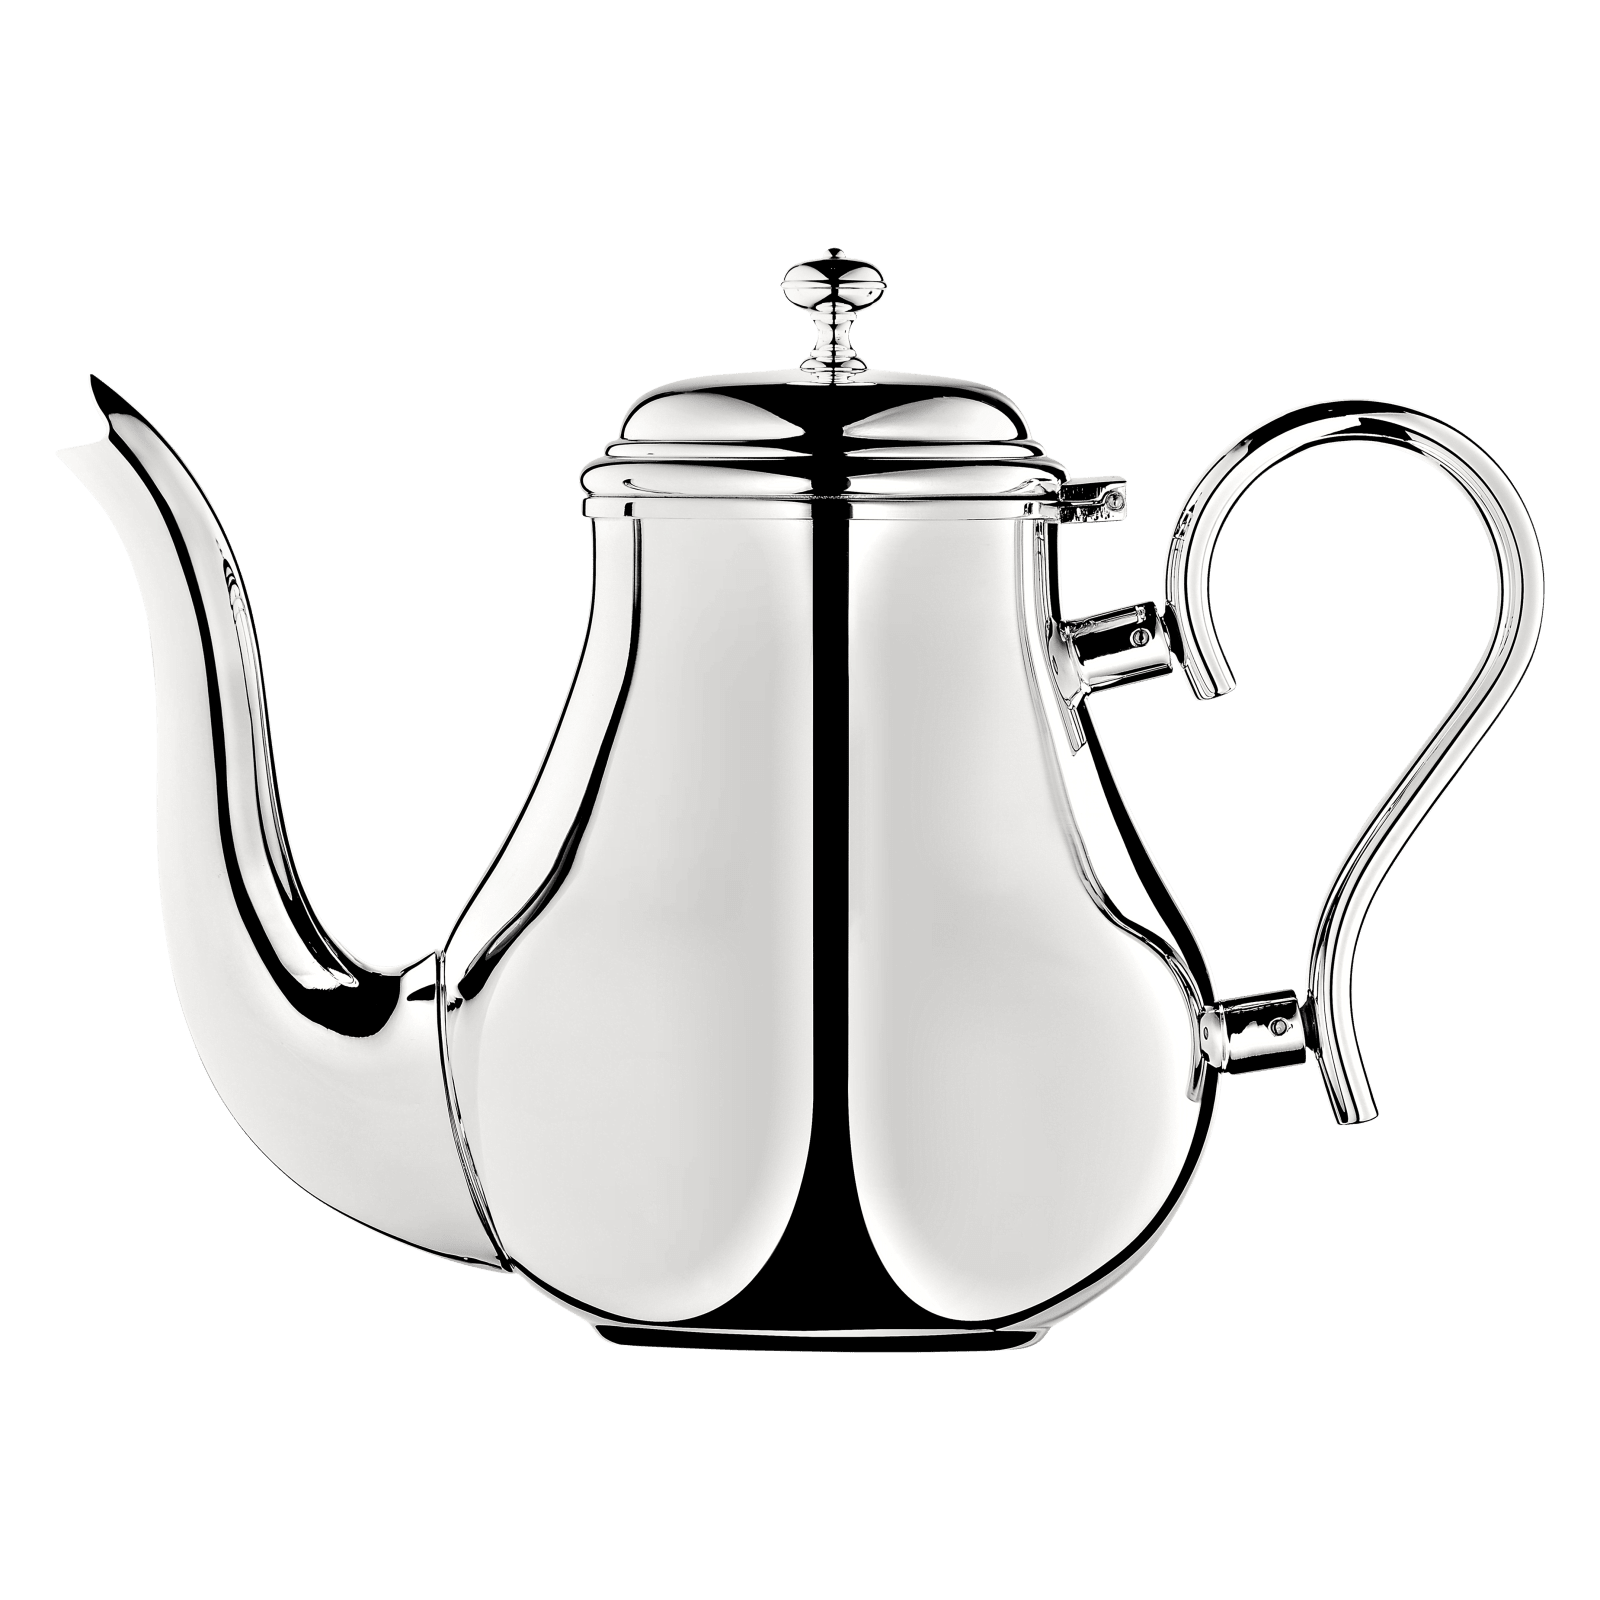 SILVER PLATE YOUR TEAPOTS & SETS WITH REAL SILVER 